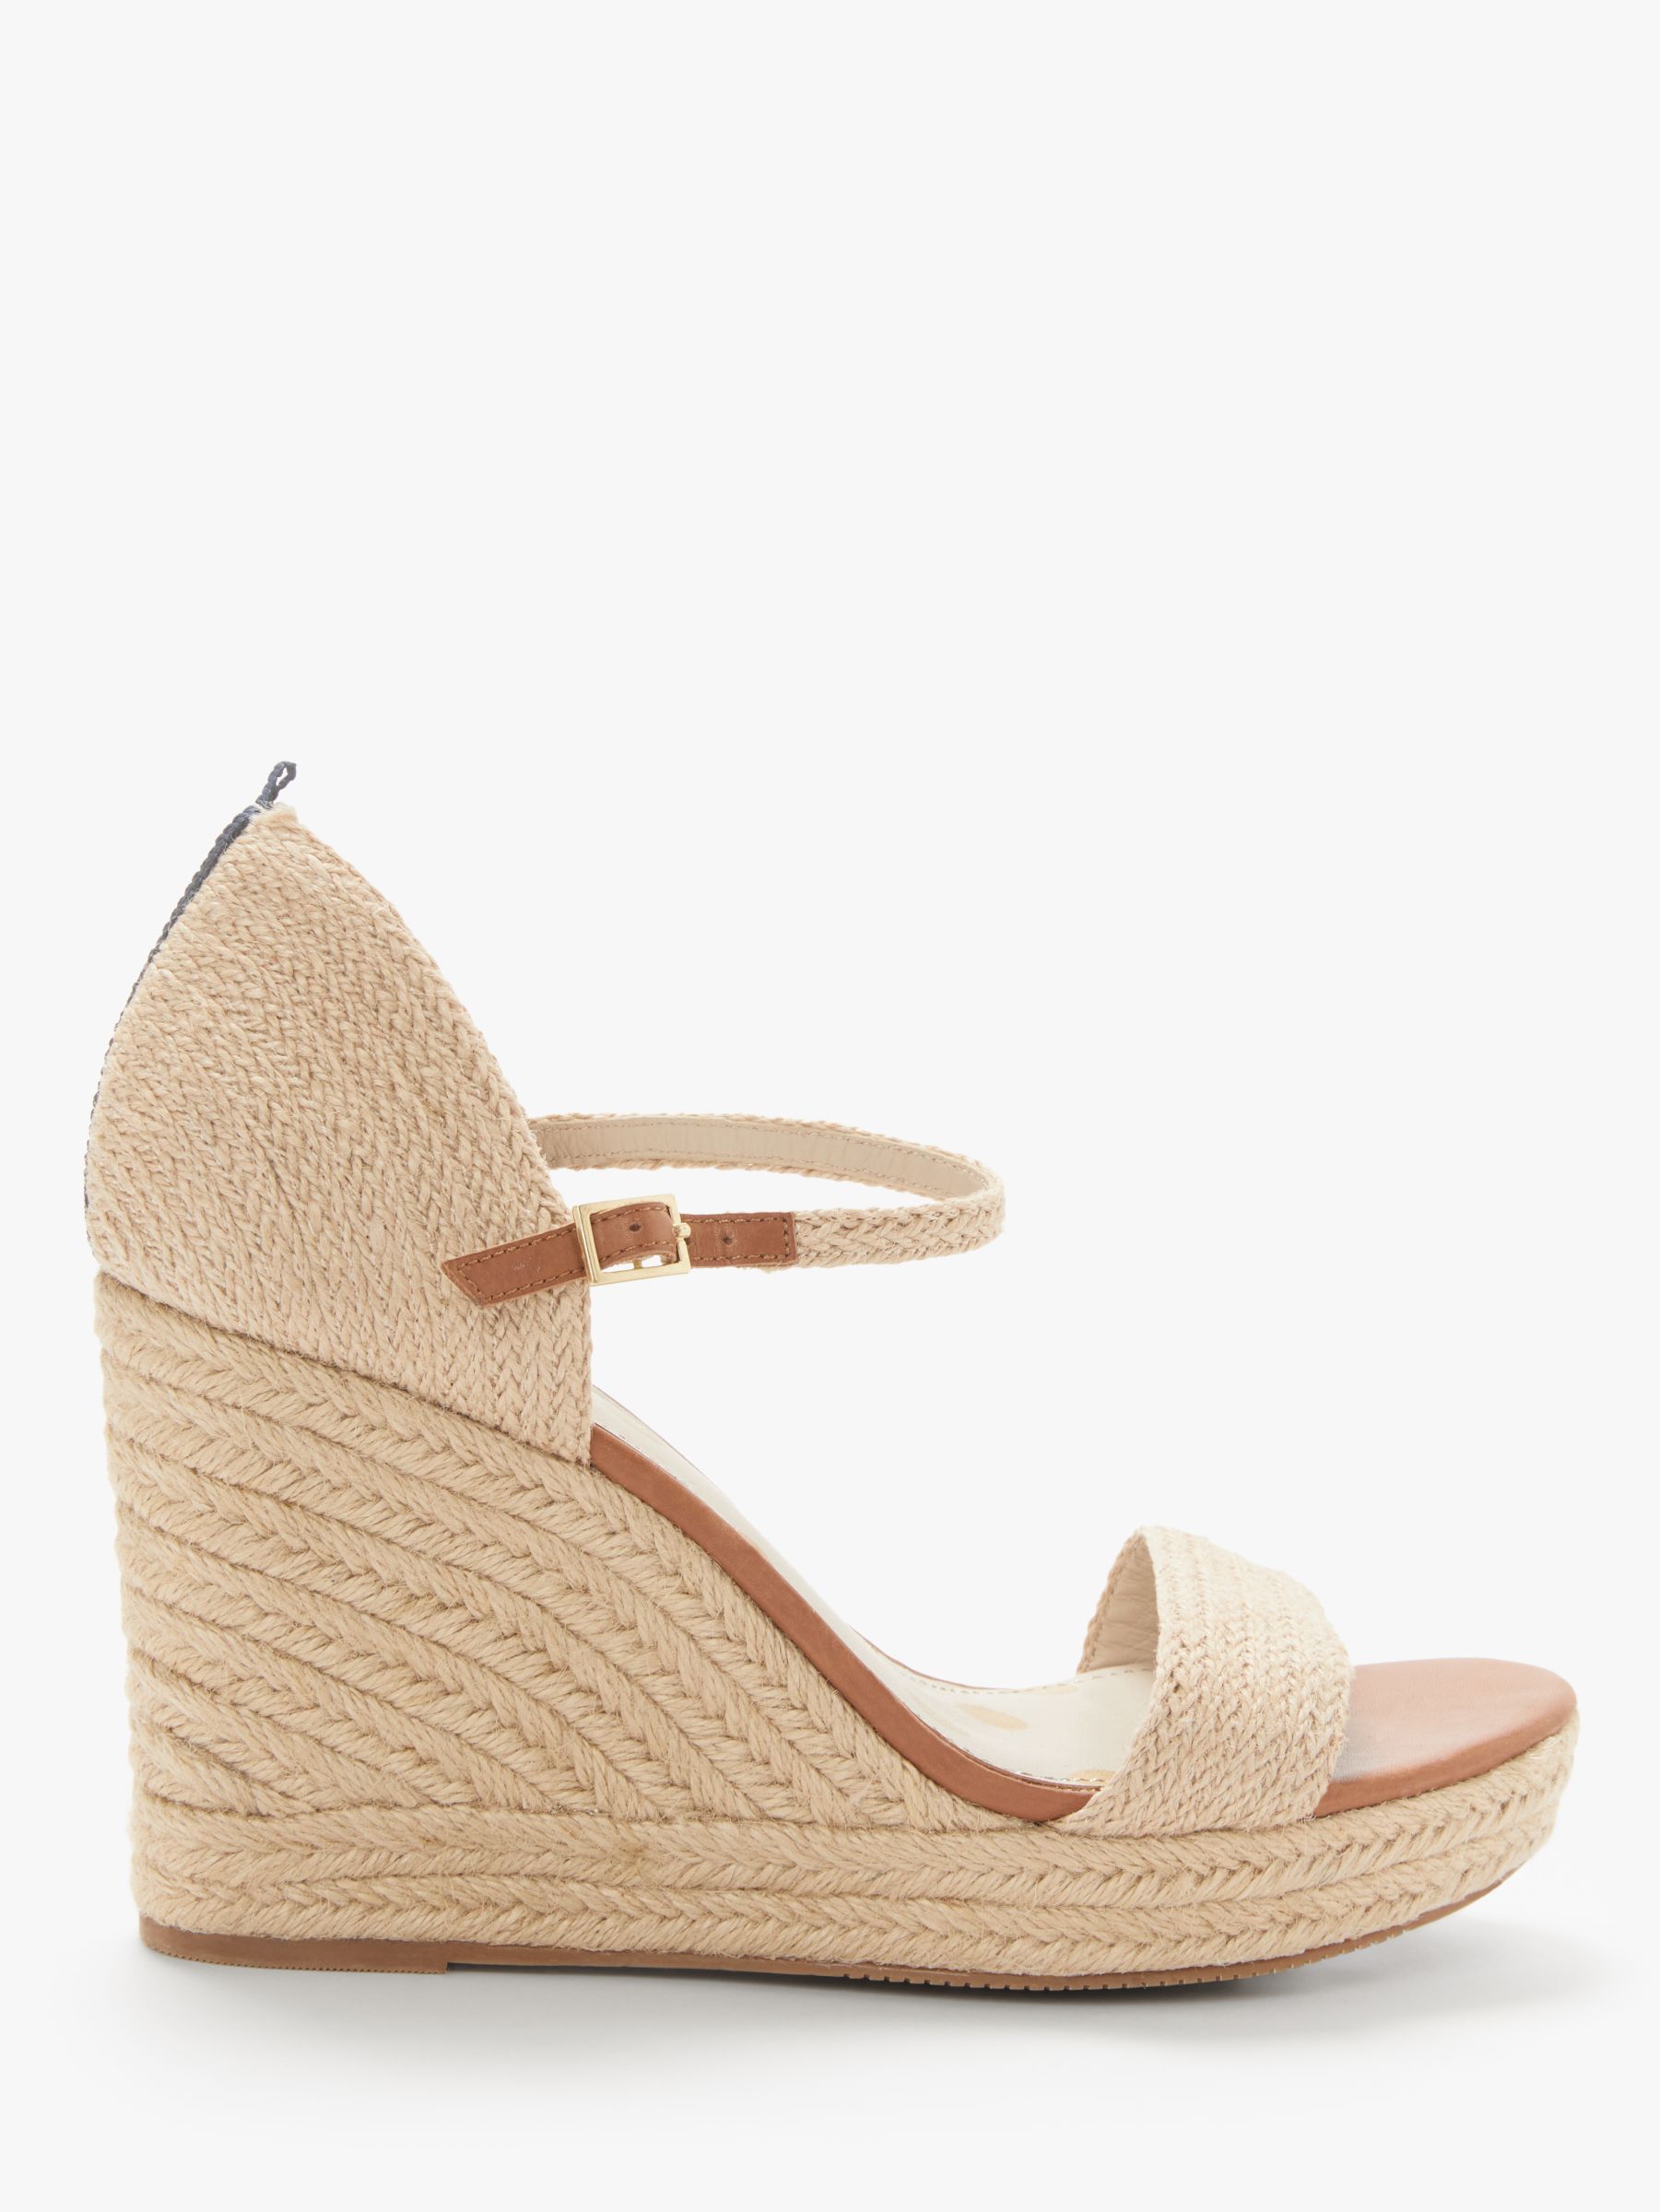 Boden Lily Espadrille Wedges, Natural at John Lewis & Partners